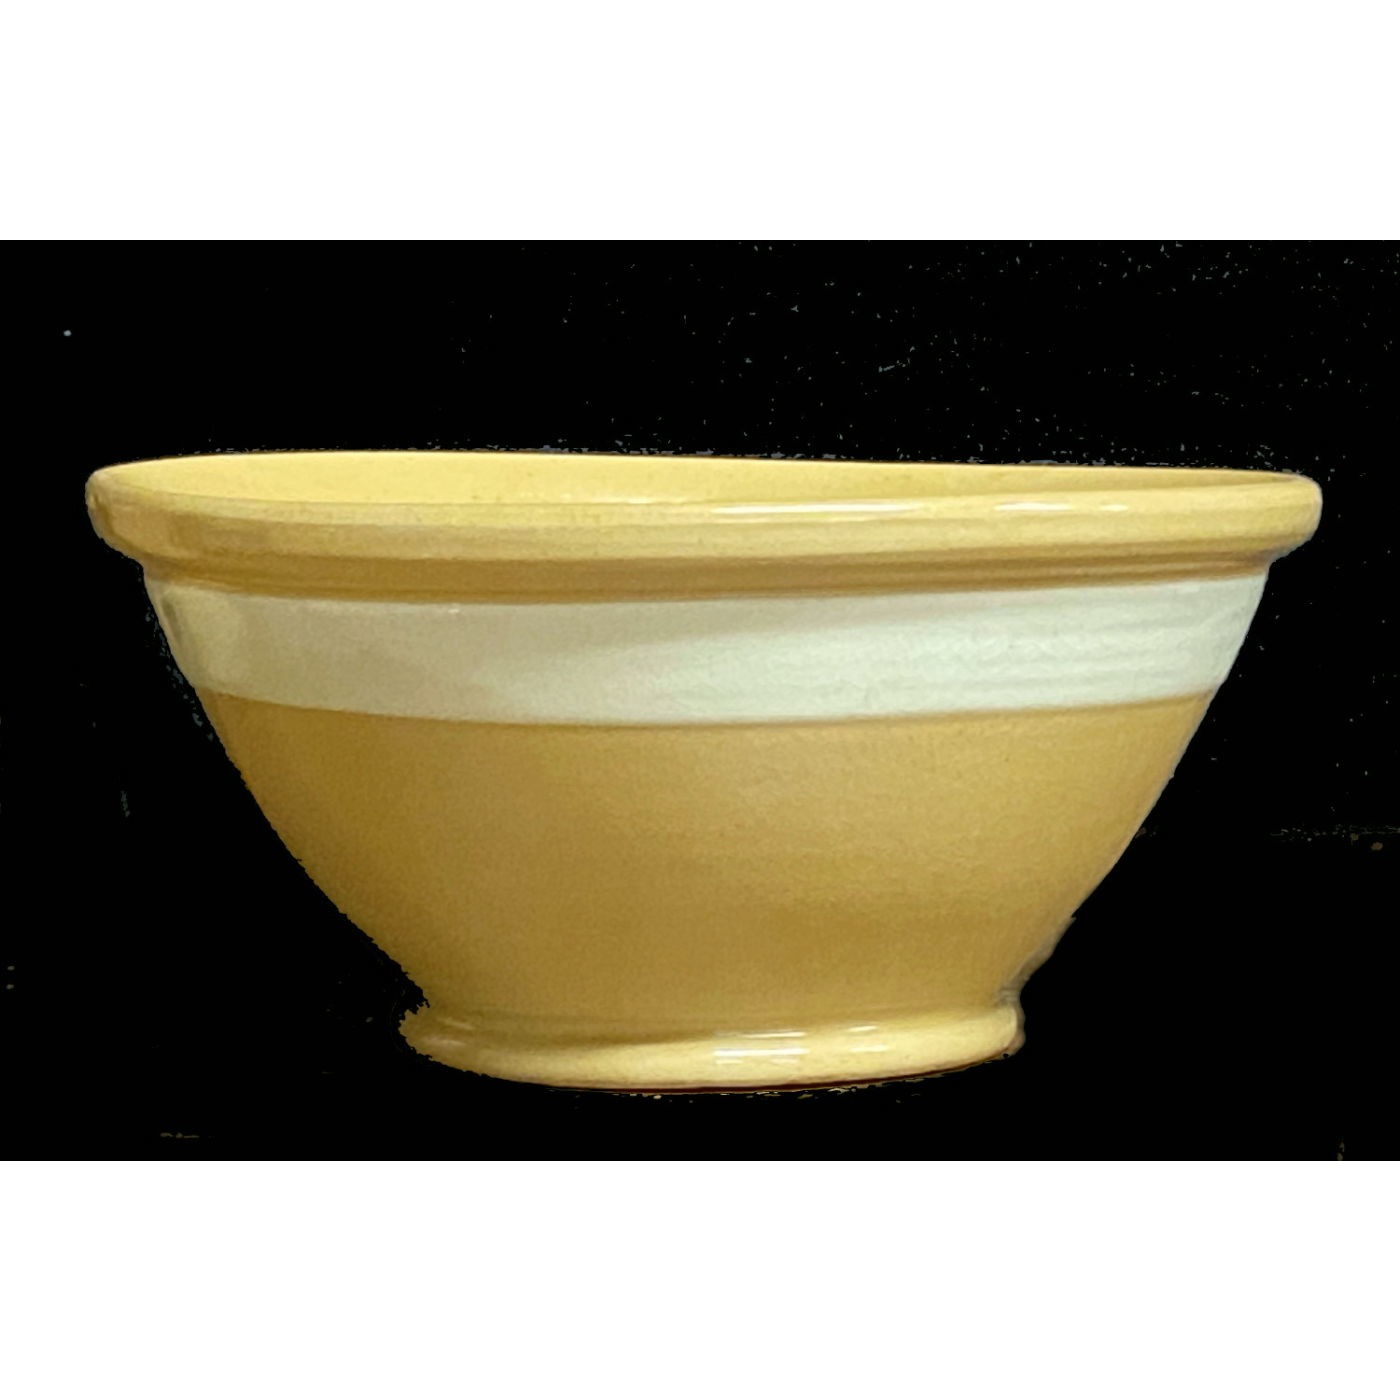 Spectacular 10" Single White Banded Yellow Ware Bowl